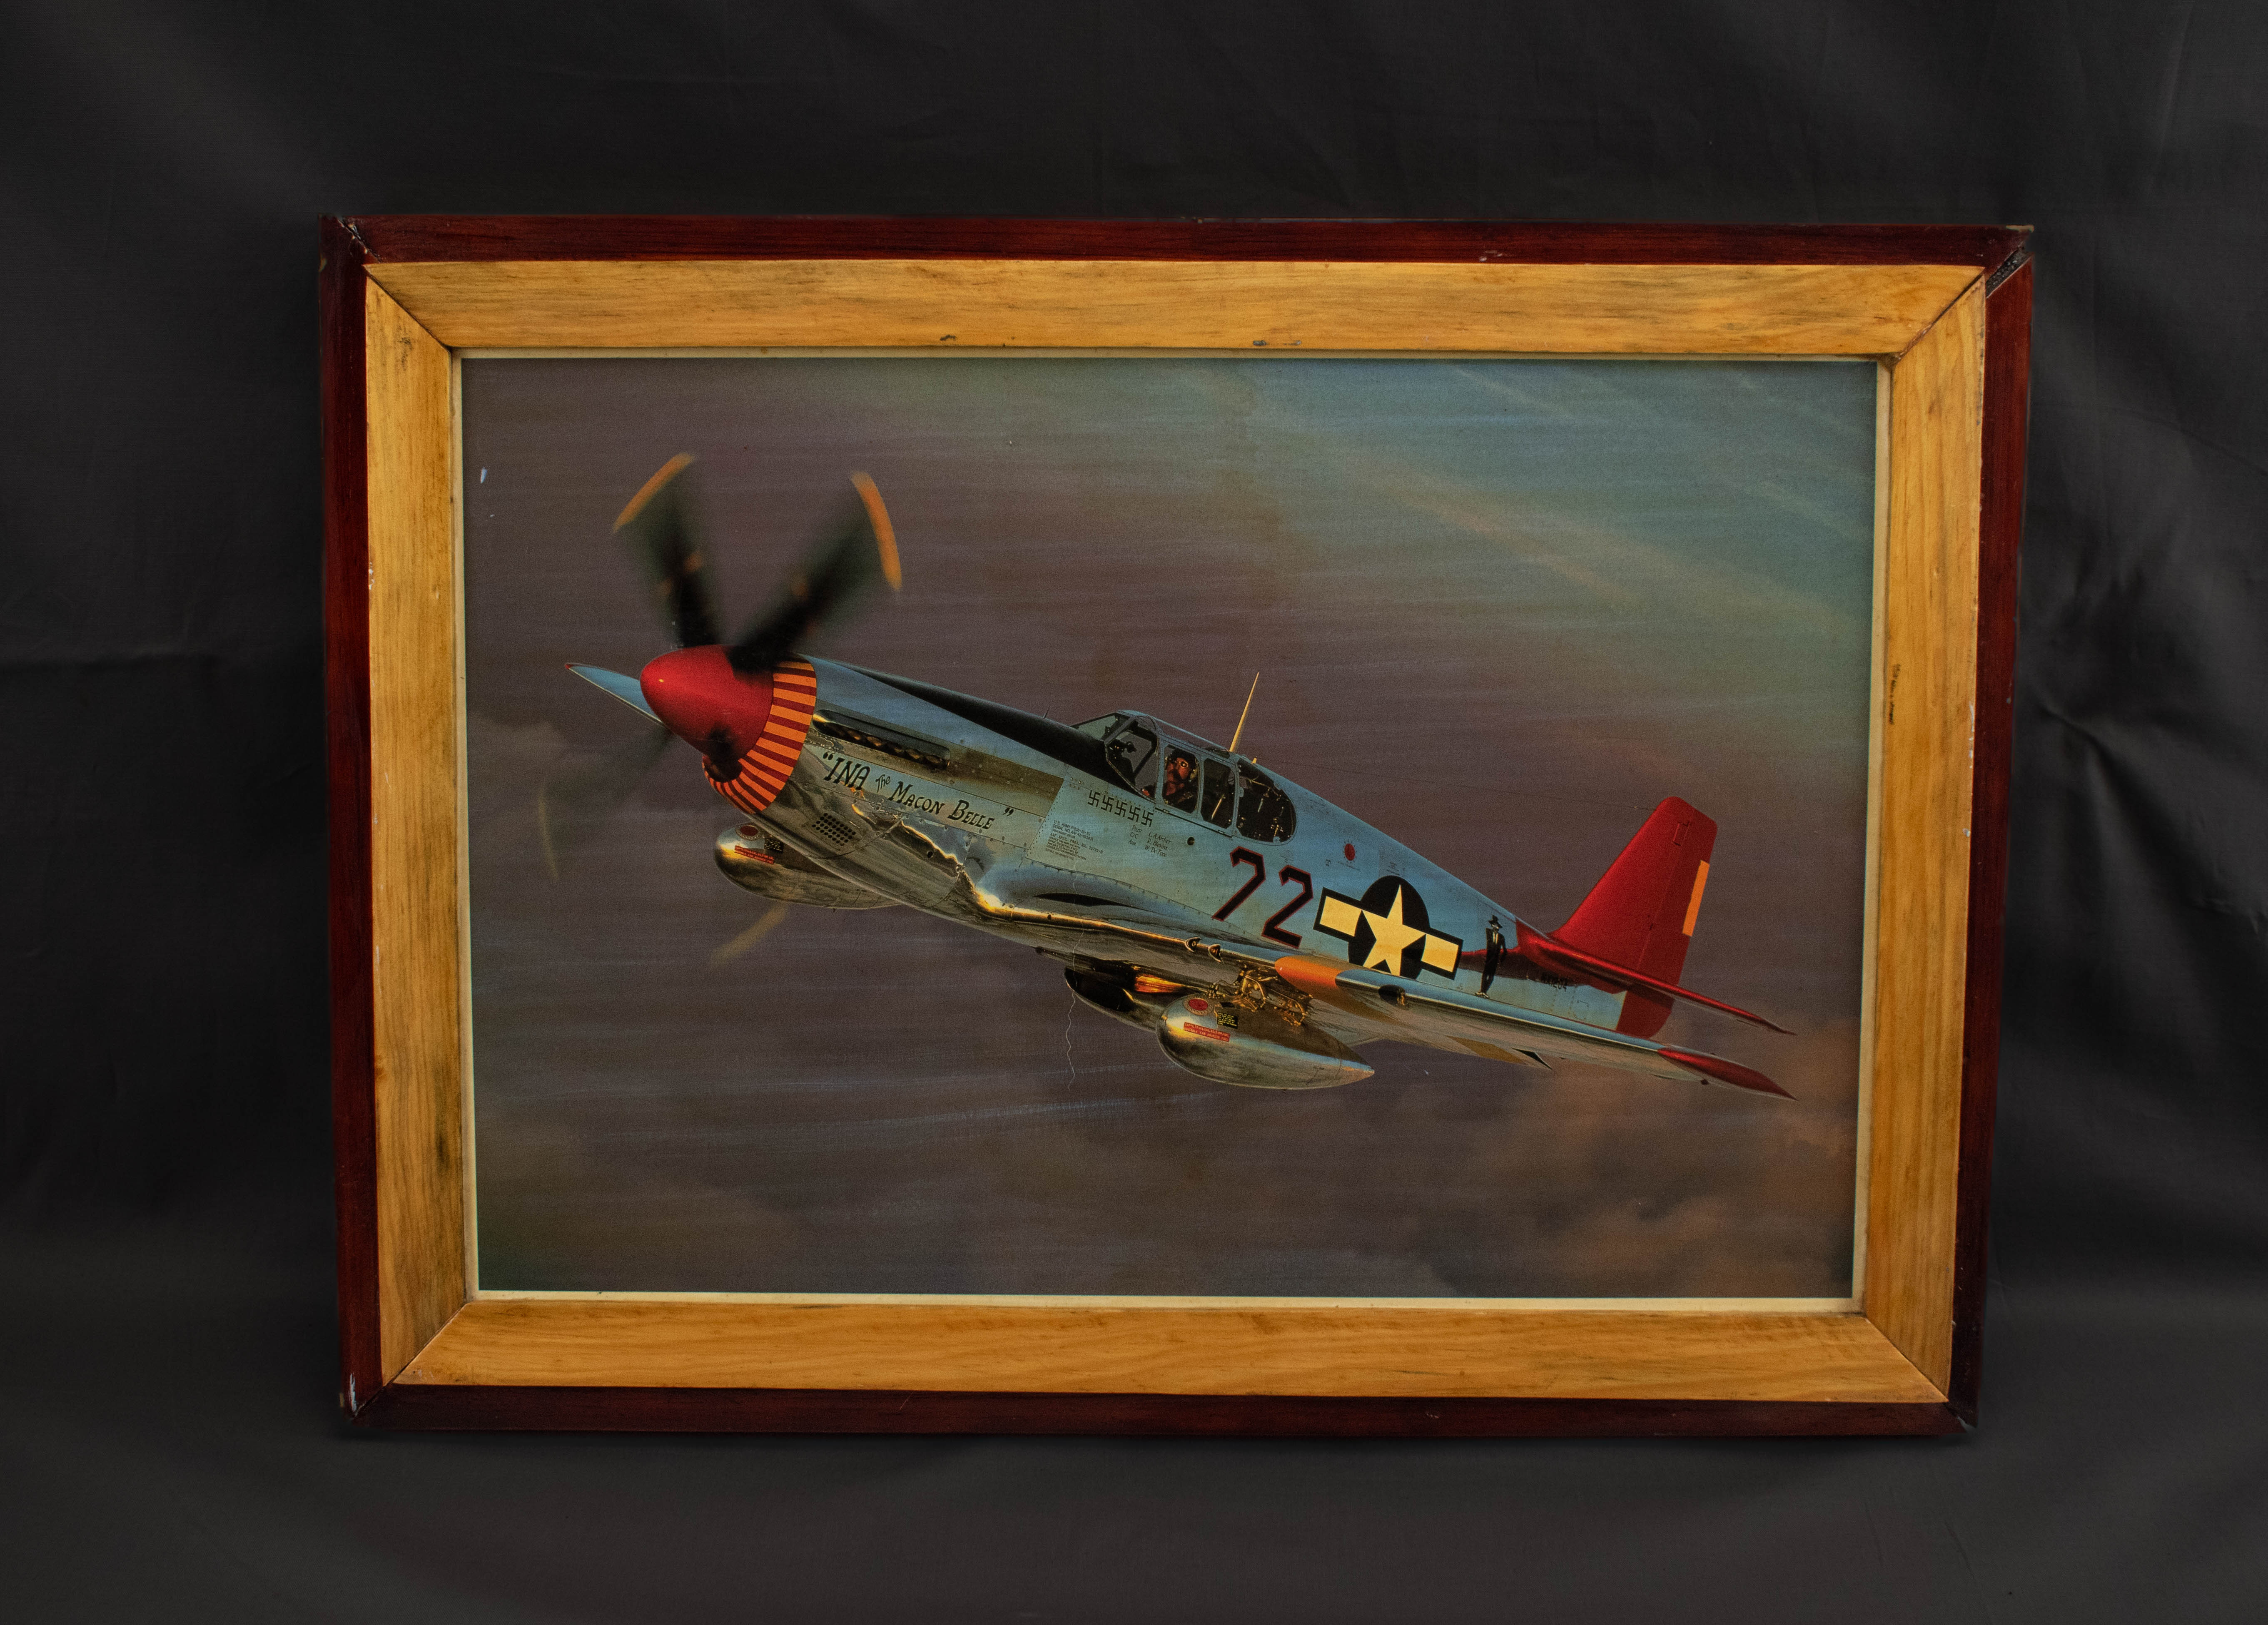 North American P-51C 10-NT Mustang Photo Framed In Wood Vintage Plane Image 20x15